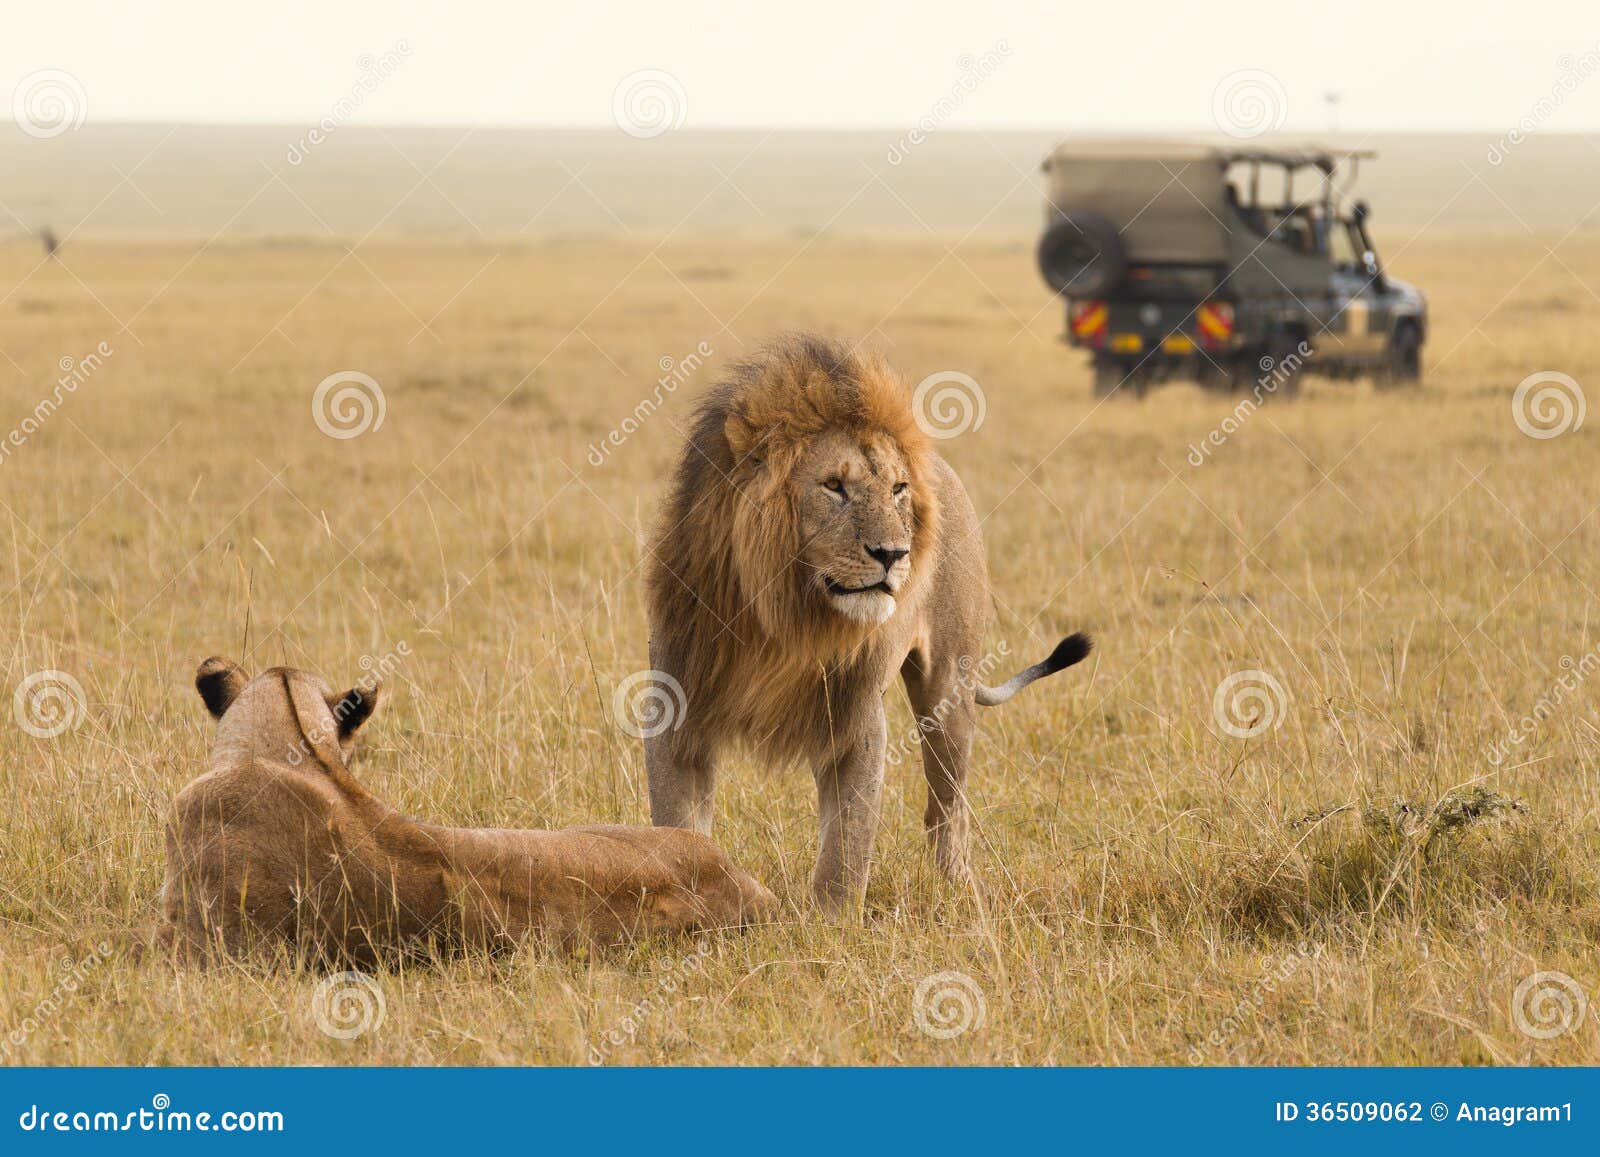 african lion couple and safari jeep